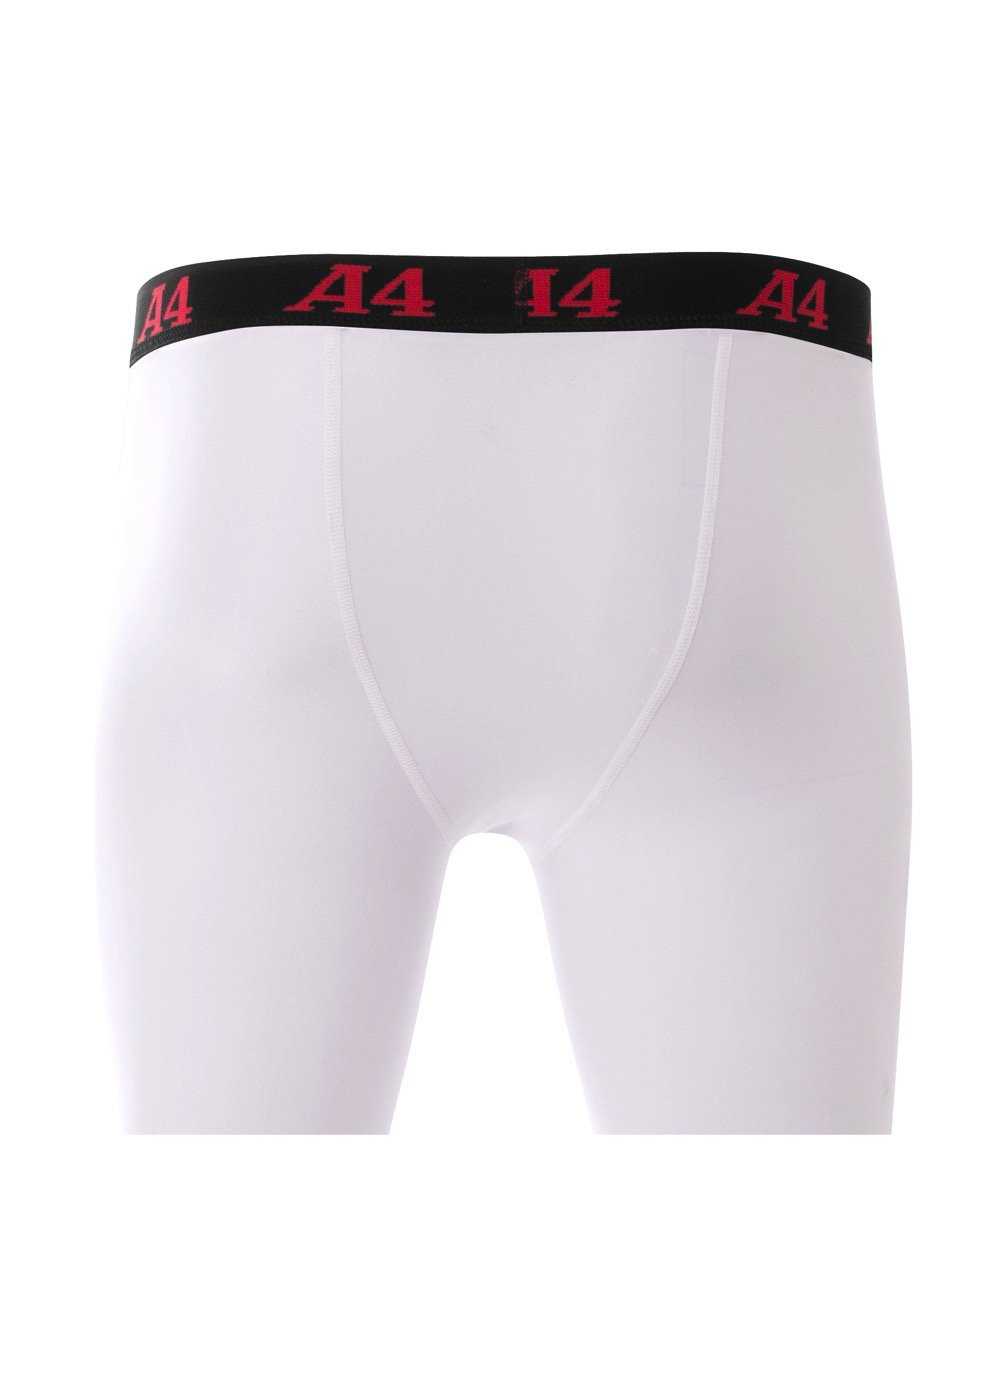 A4 N5380 Compression Short - White - HIT a Double